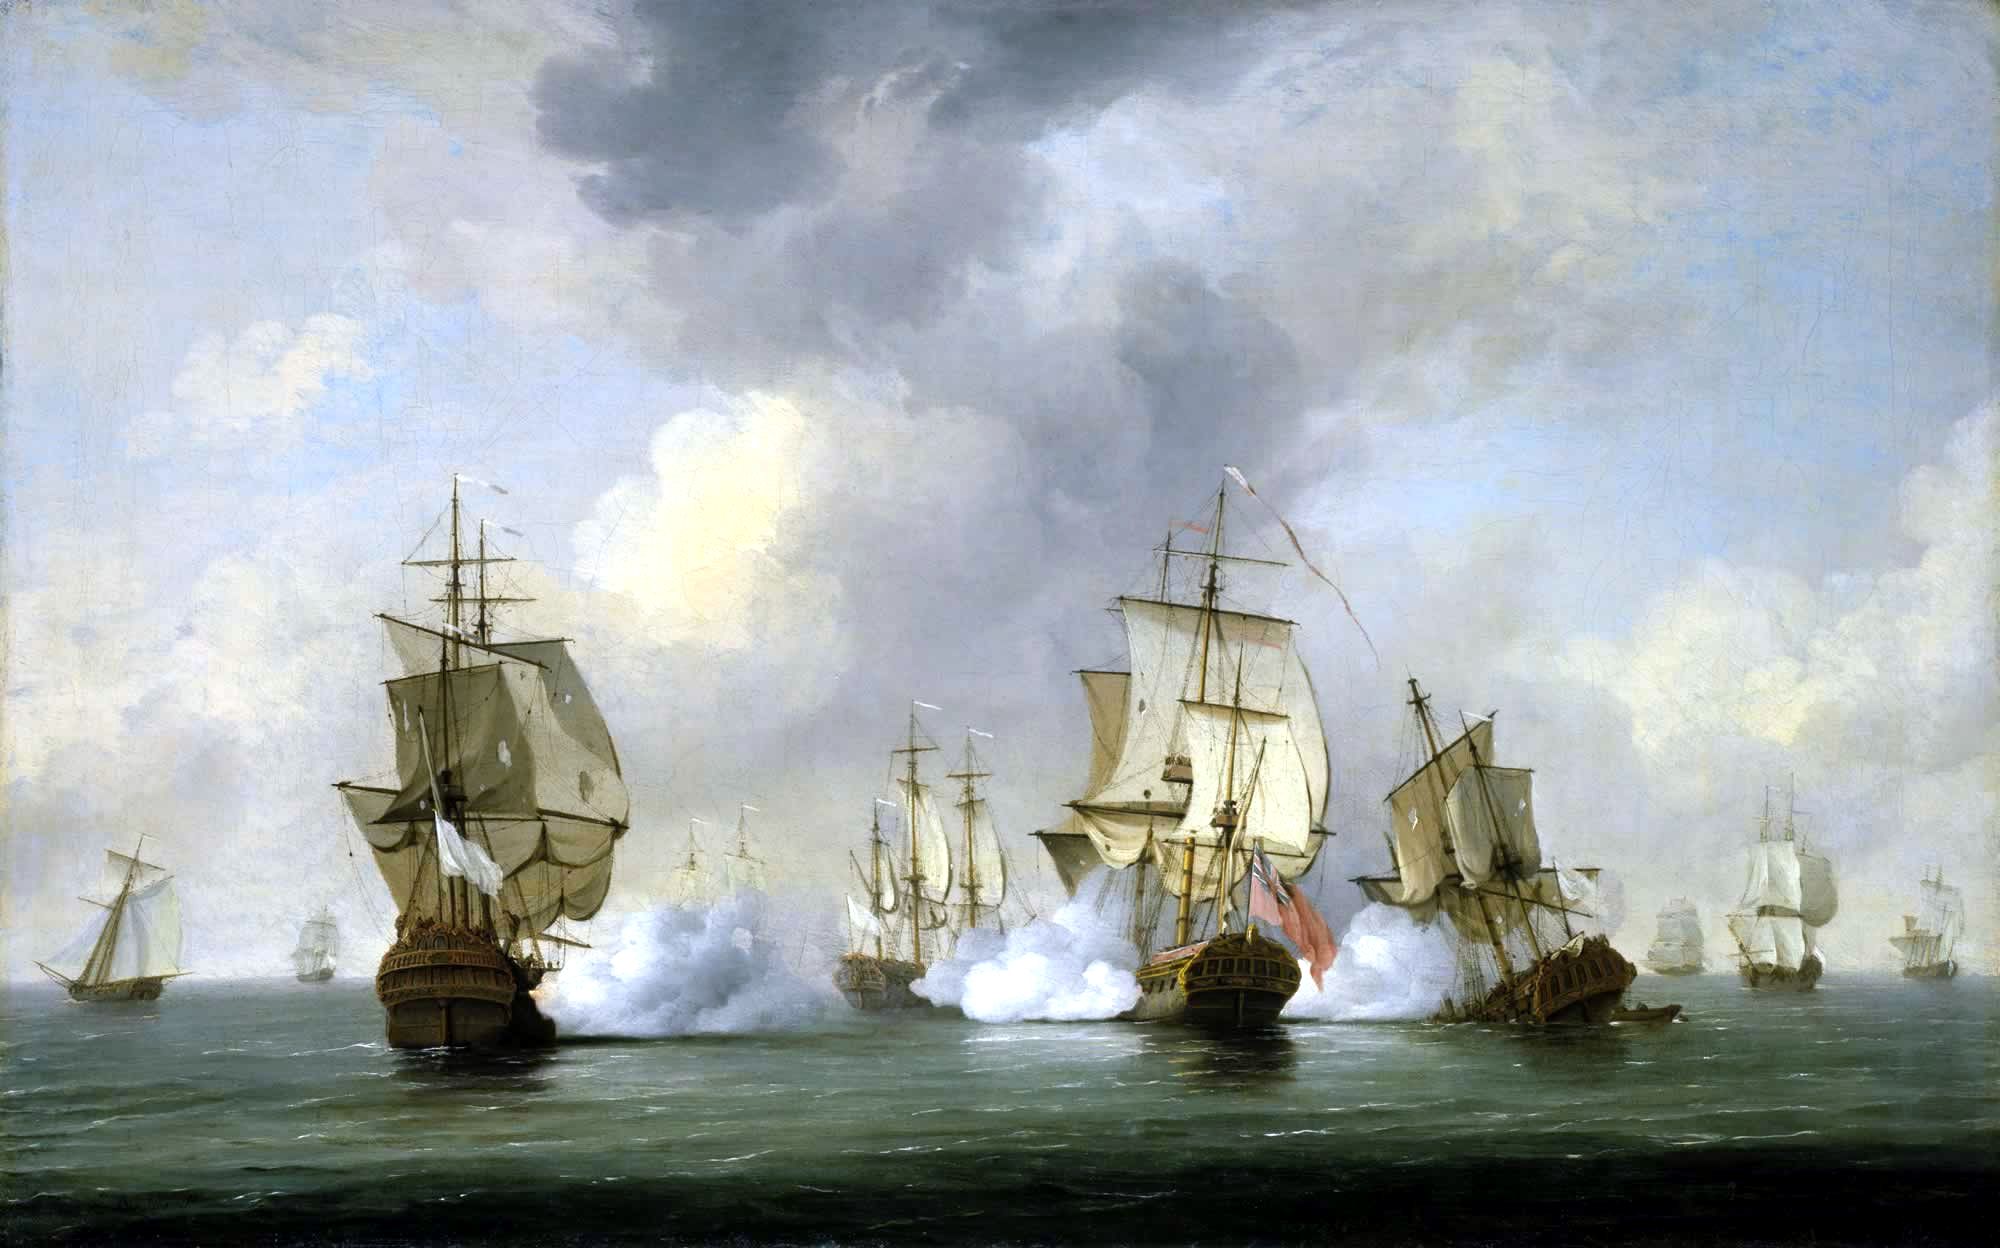 Commodore Walkers Action the Privateer 'Boscawen' Engaging a Fleet of French Ships 23 May 1745.jpg